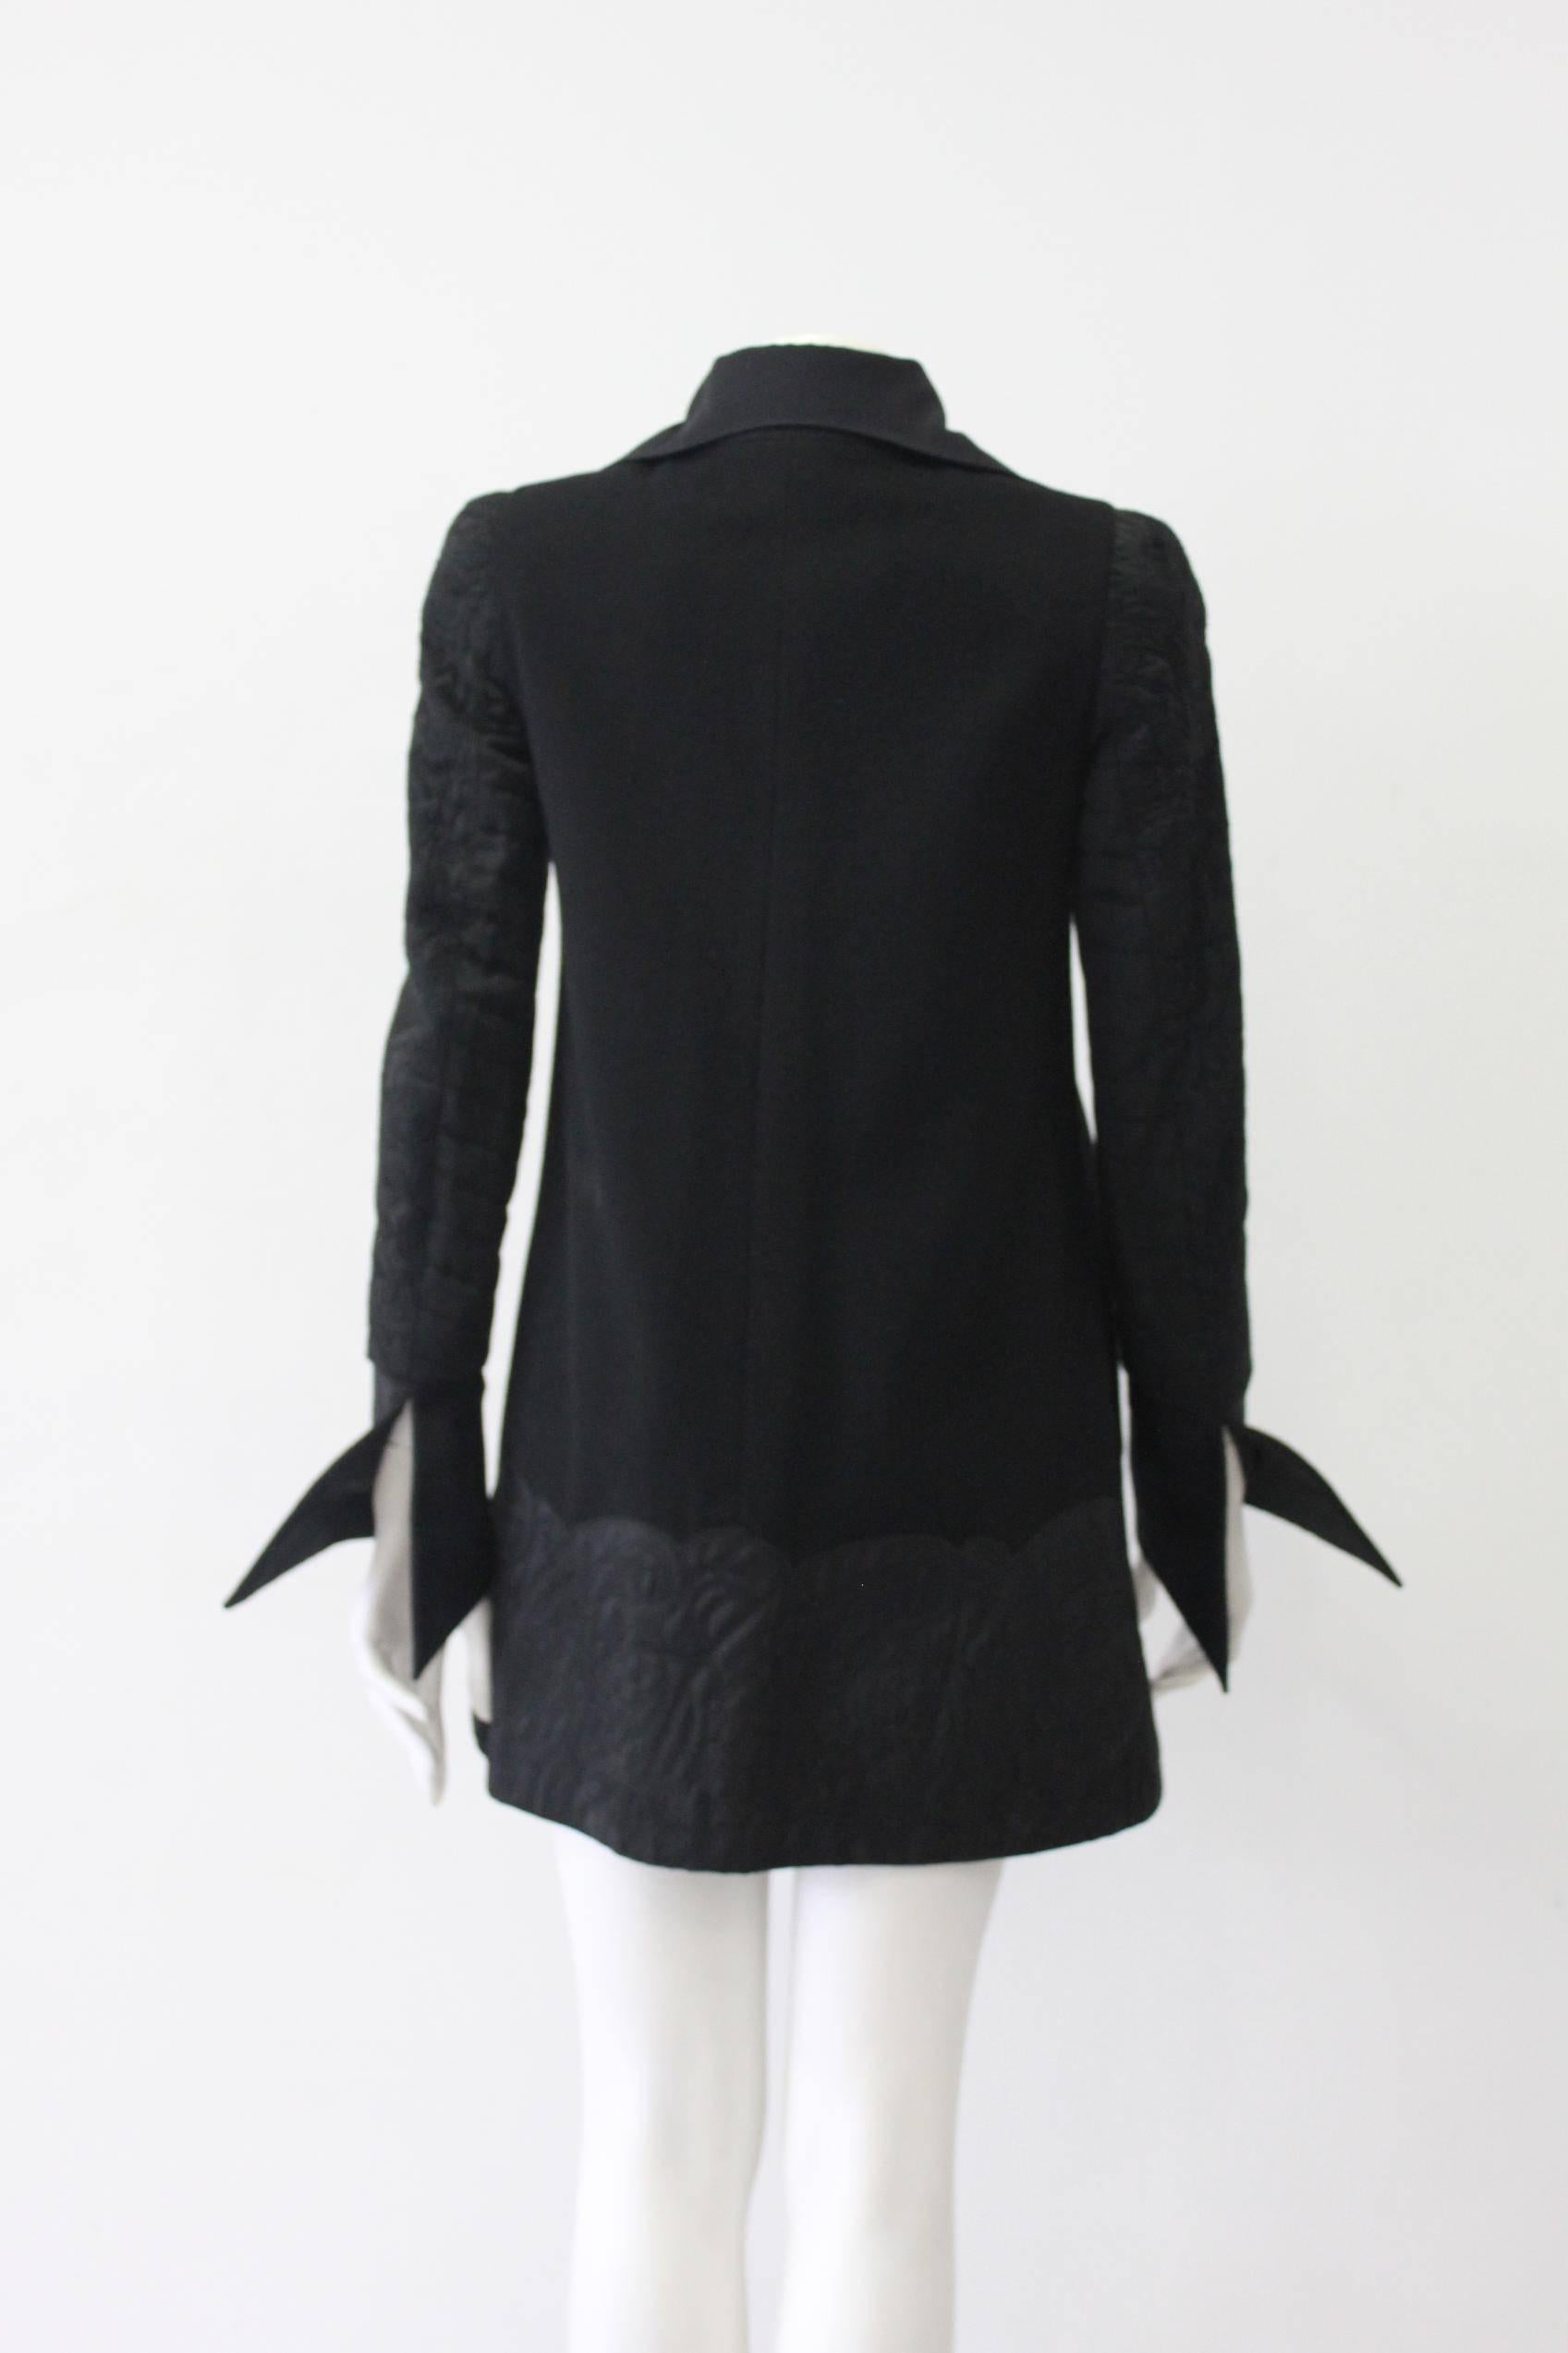 Black Gianni Versace Embroided Evening Coat Fall 1996 For Sale